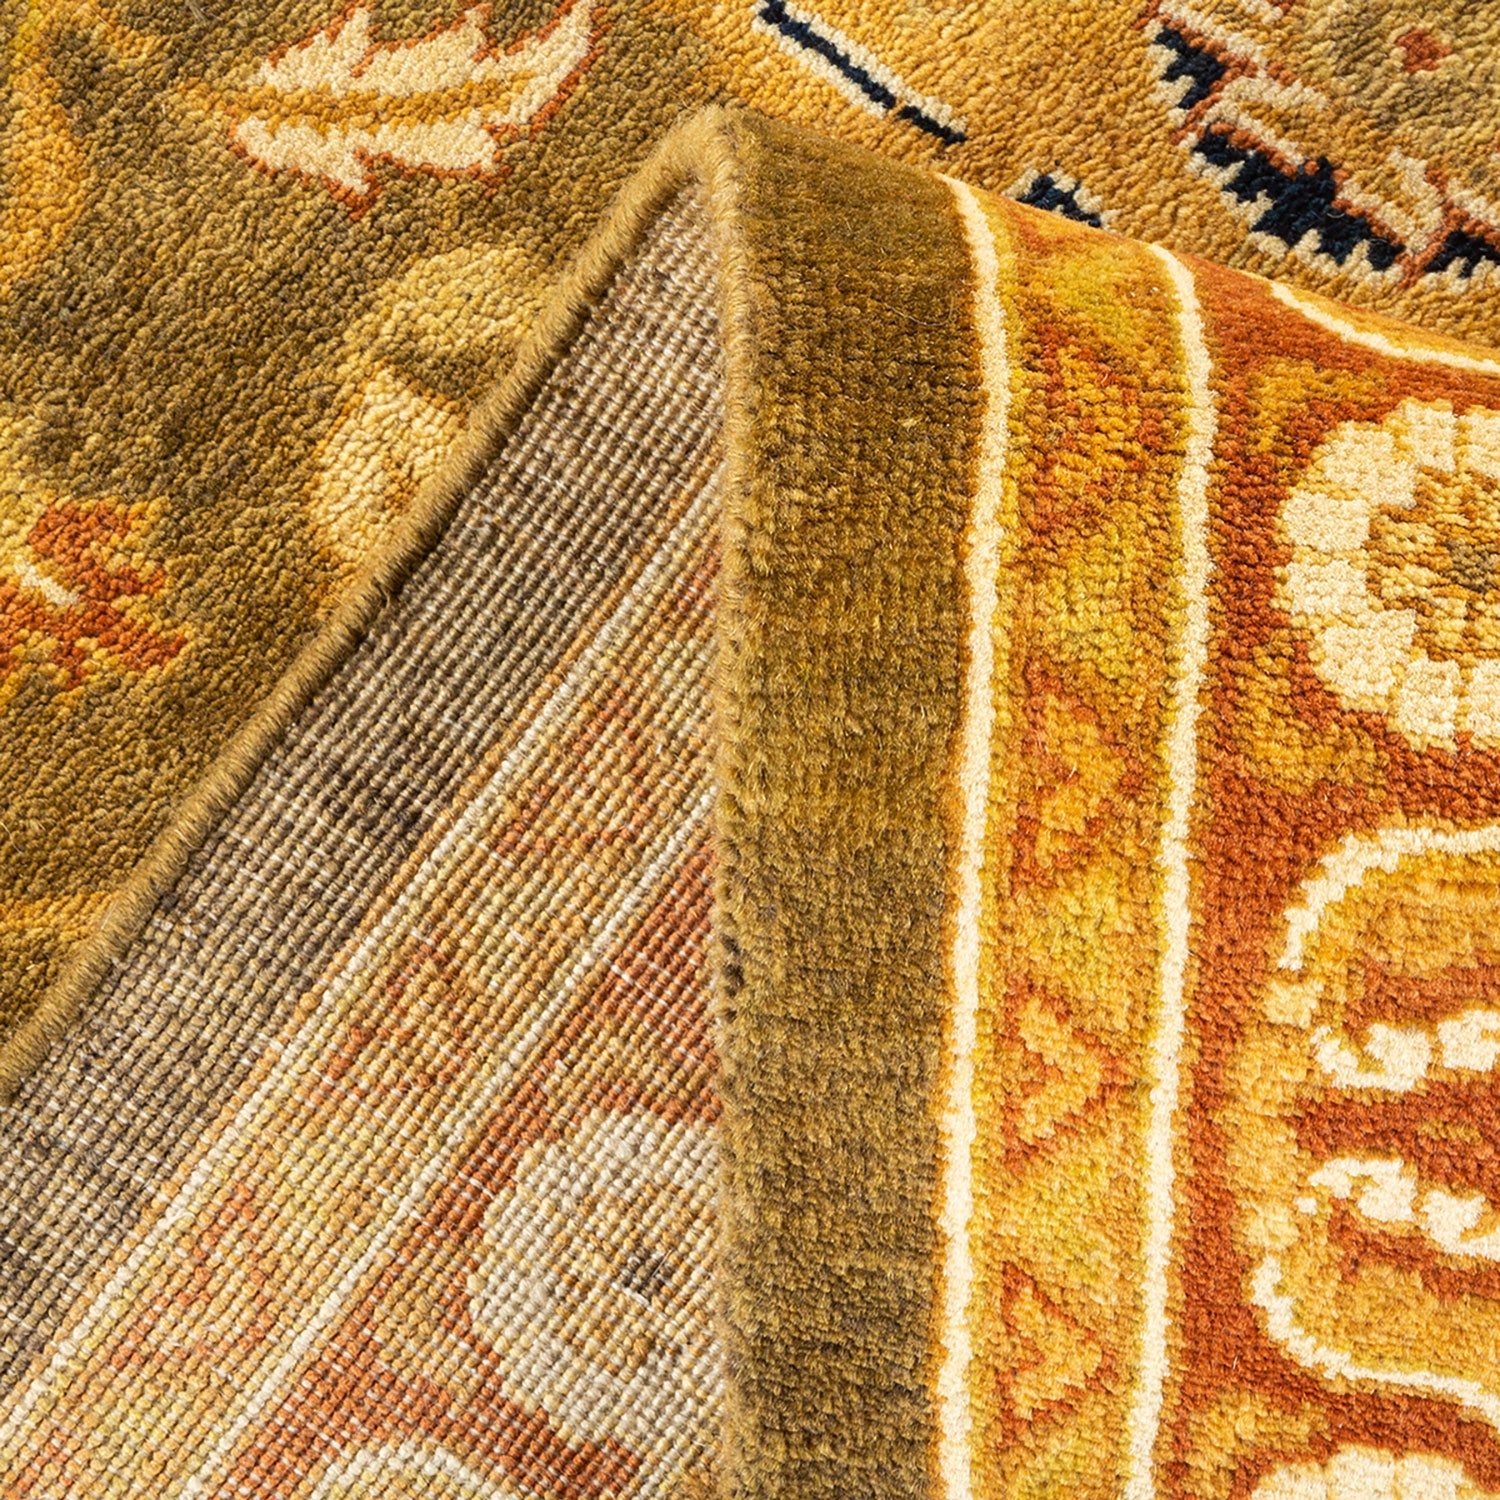 Two contrasting carpet patterns showcase diverse styles and vibrant colors.